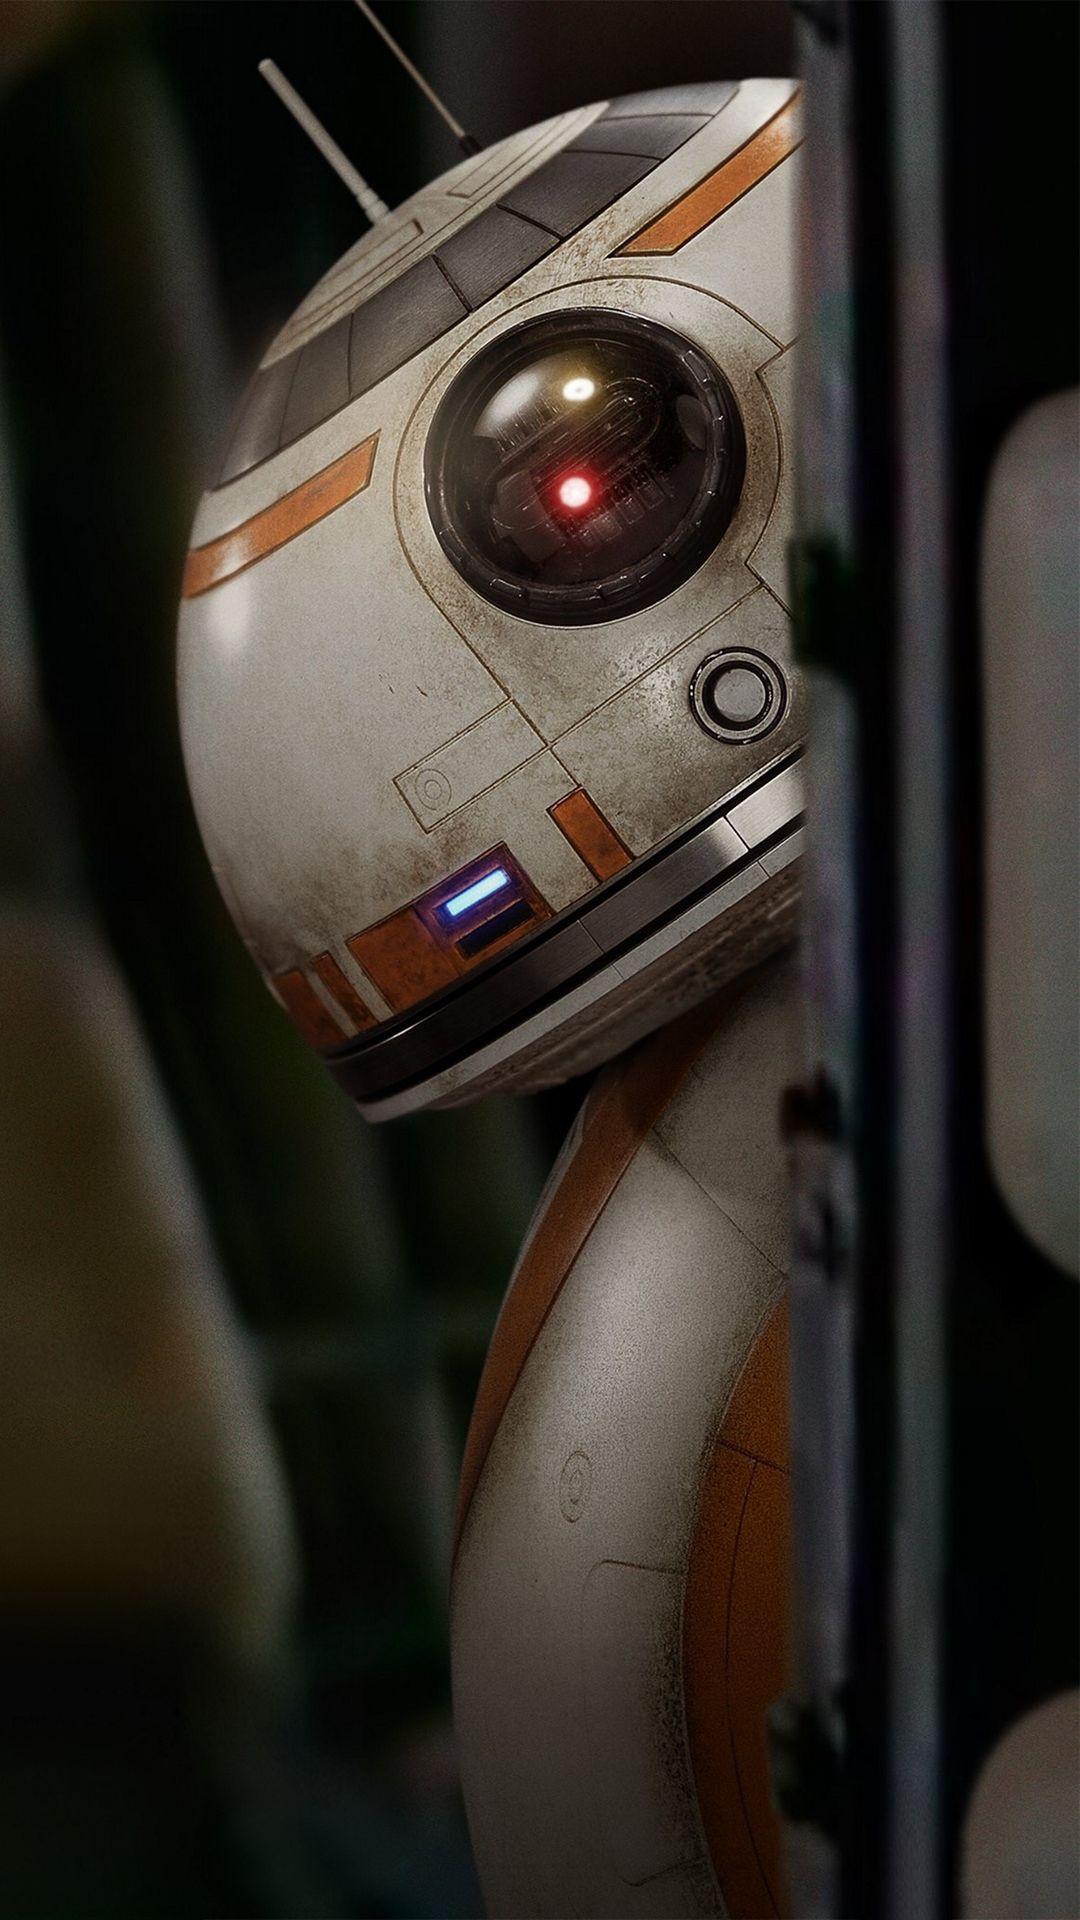 BB8 lockscreen wallpaper Designed for iPhone to look like hes  illuminating the time Msg me for PSD or download links  rStarWars